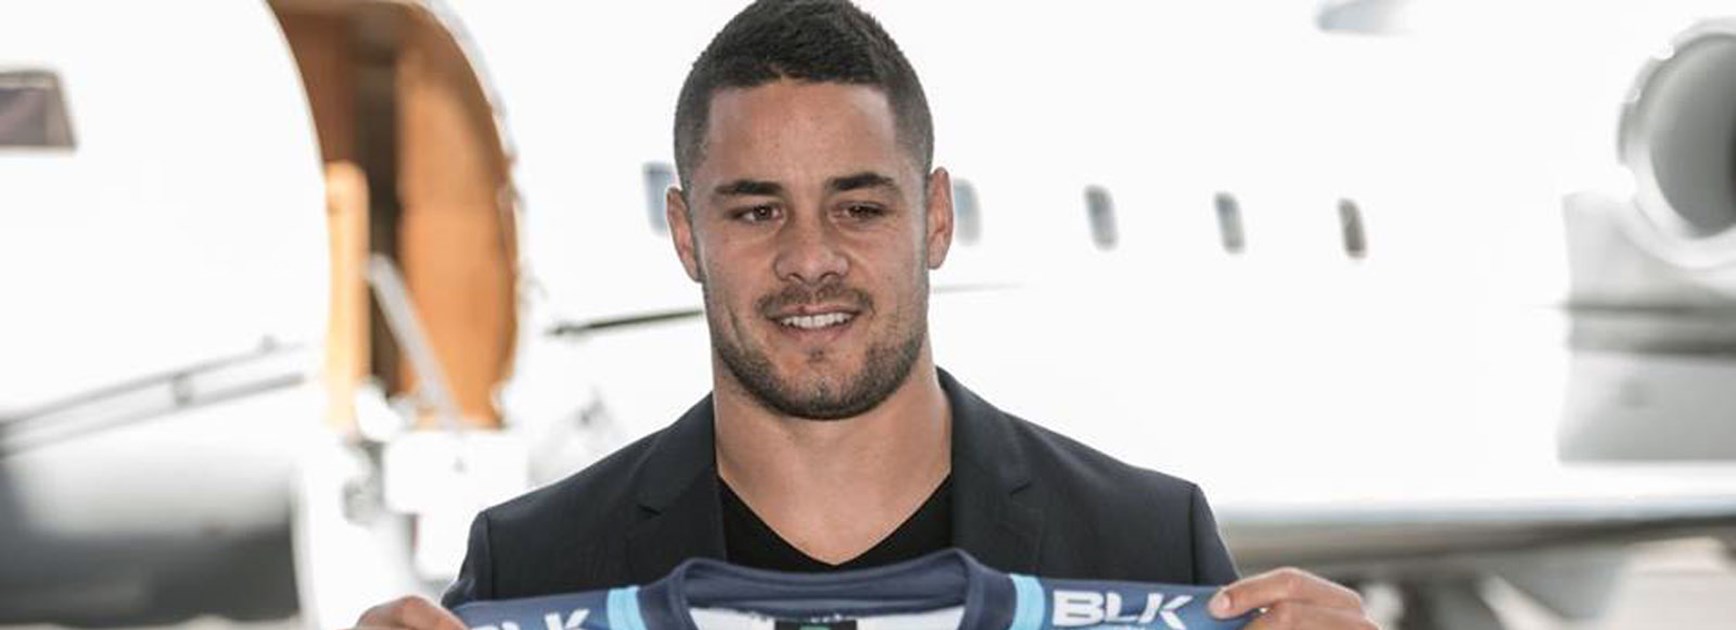 Jarryd Hayne was unveiled as a Titans player at Gold Coast airport on Wednesday morning.